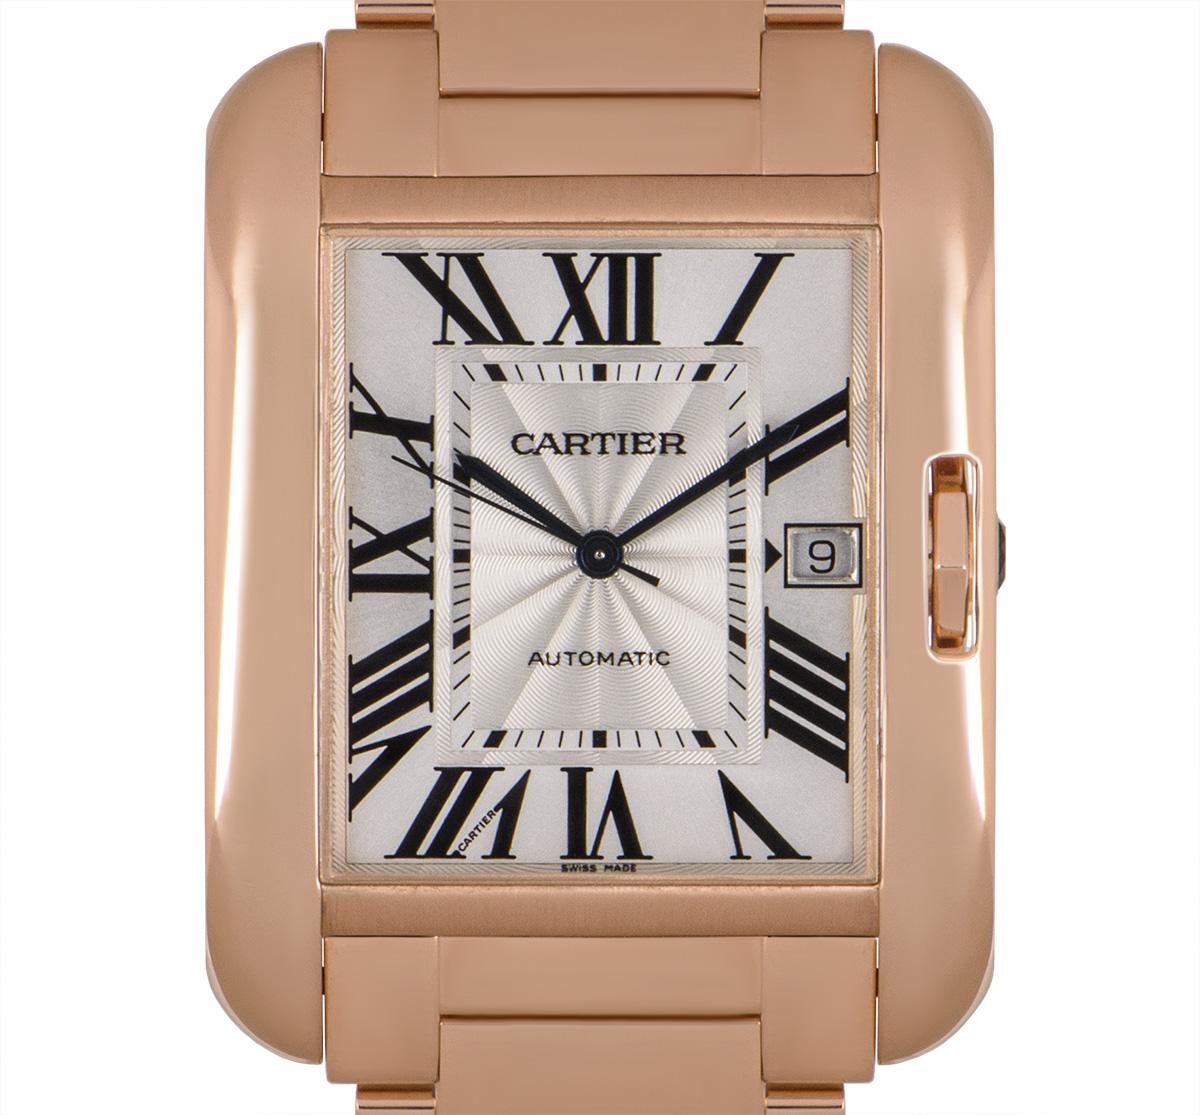 In excellent condition, a Tank Anglaise XL in rose gold by Cartier. The silver dial concealed with sapphire crystal features Roman numerals, sword-shaped hands in blued steel, a date display at 3 o'clock and a Cartier secret signature at V of VII. A